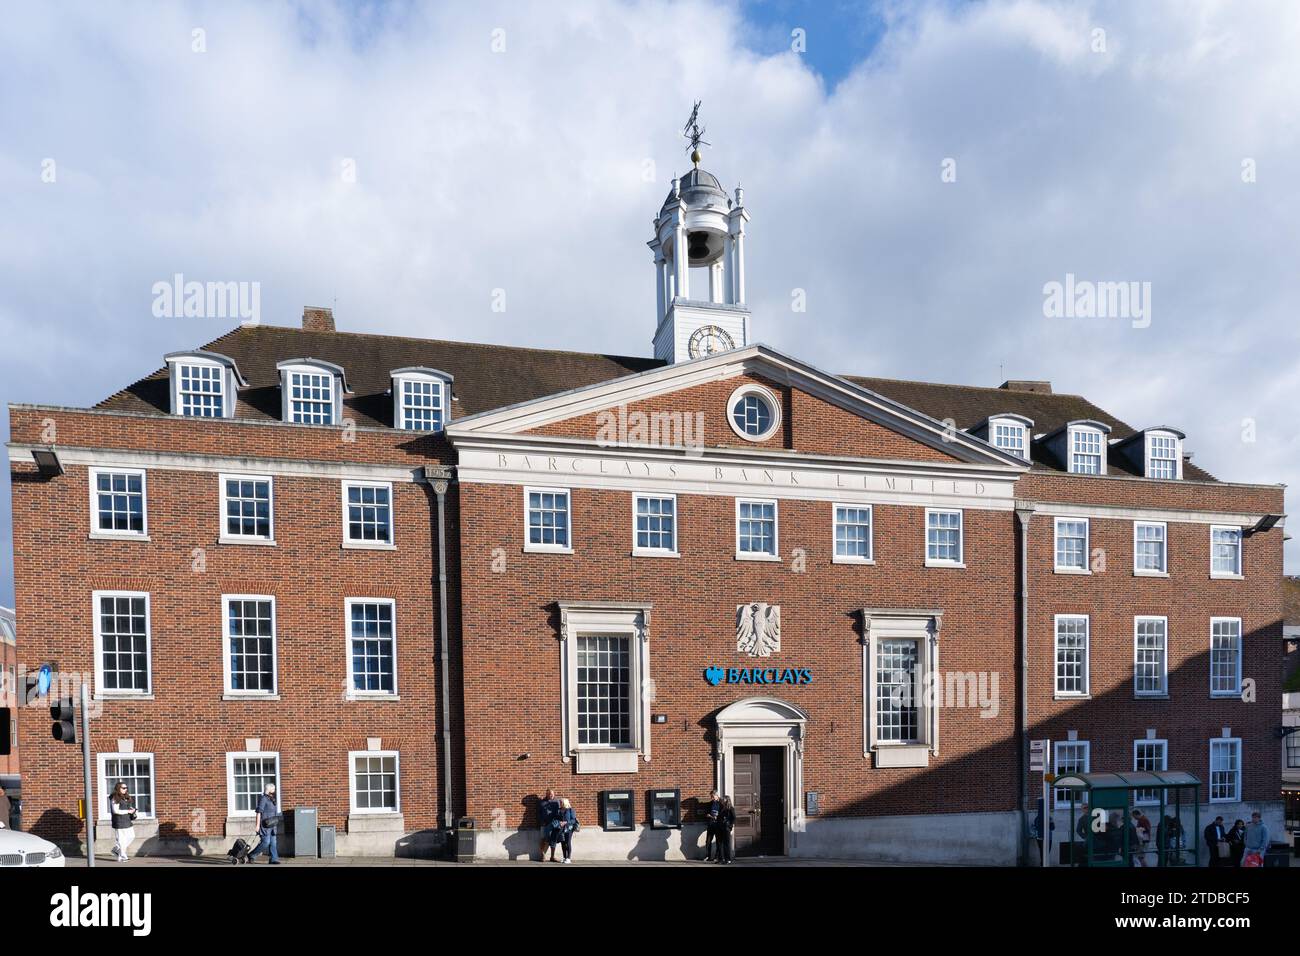 Barclays bank clock tower building in Winchester - a modern Georgian architectural style. One of the big four UK high street banks Stock Photo